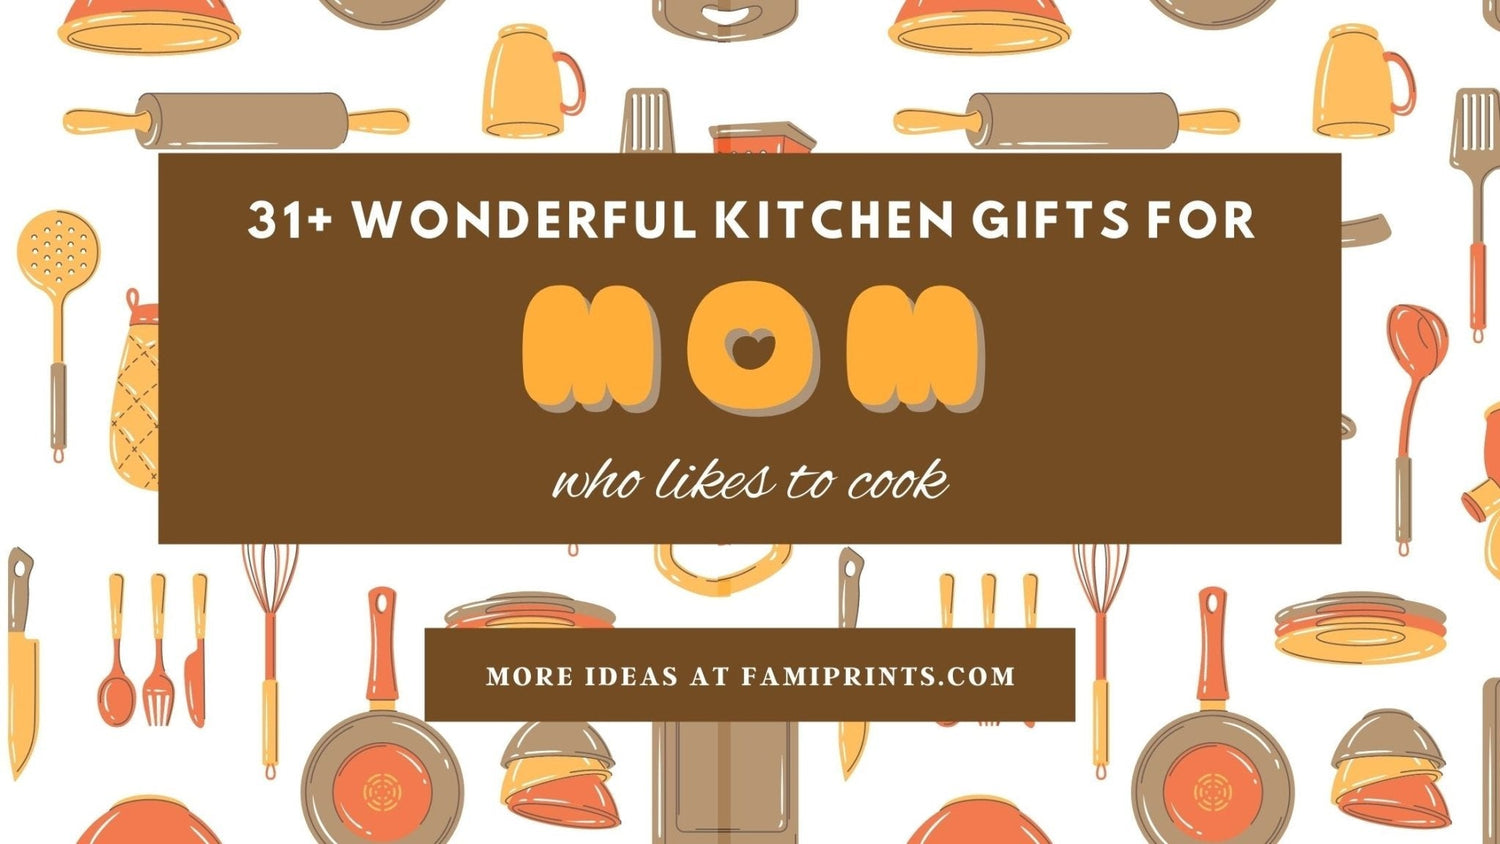 31+ Wonderful Kitchen Gifts For Mom Who Likes To Cook - FamiPrints | Trending Customizable Family Gifts